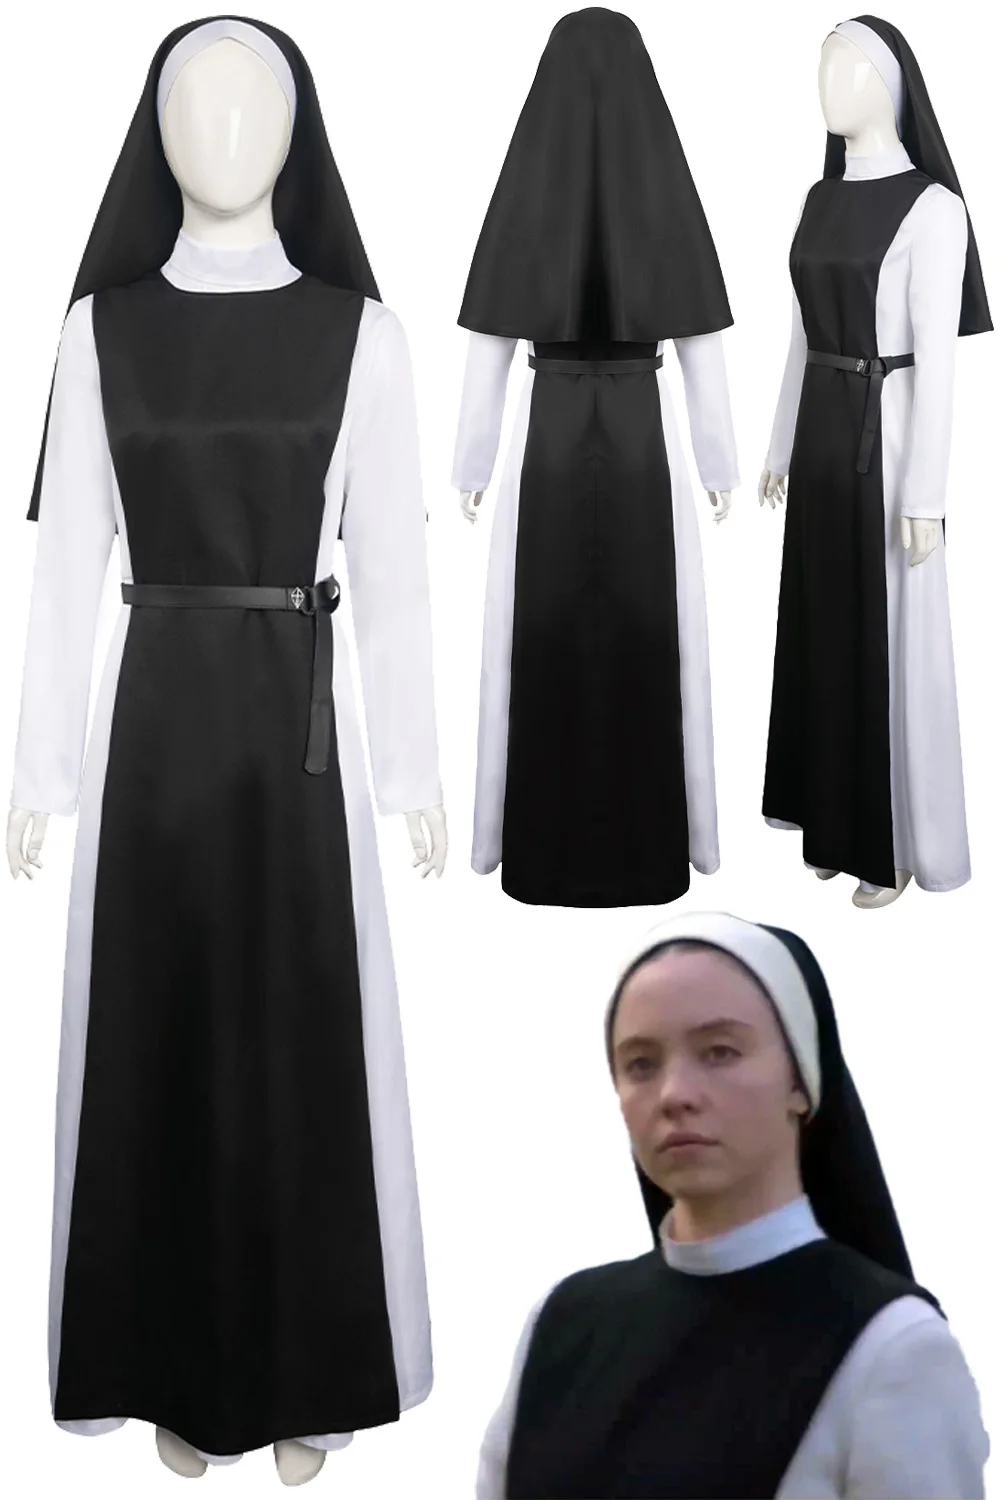 

Cecilia Fantasy Cosplay Nun Dress Suits Horror Movie Immaculate Costume Disguise Adult Women Roleplay Fantasia Outfits Female